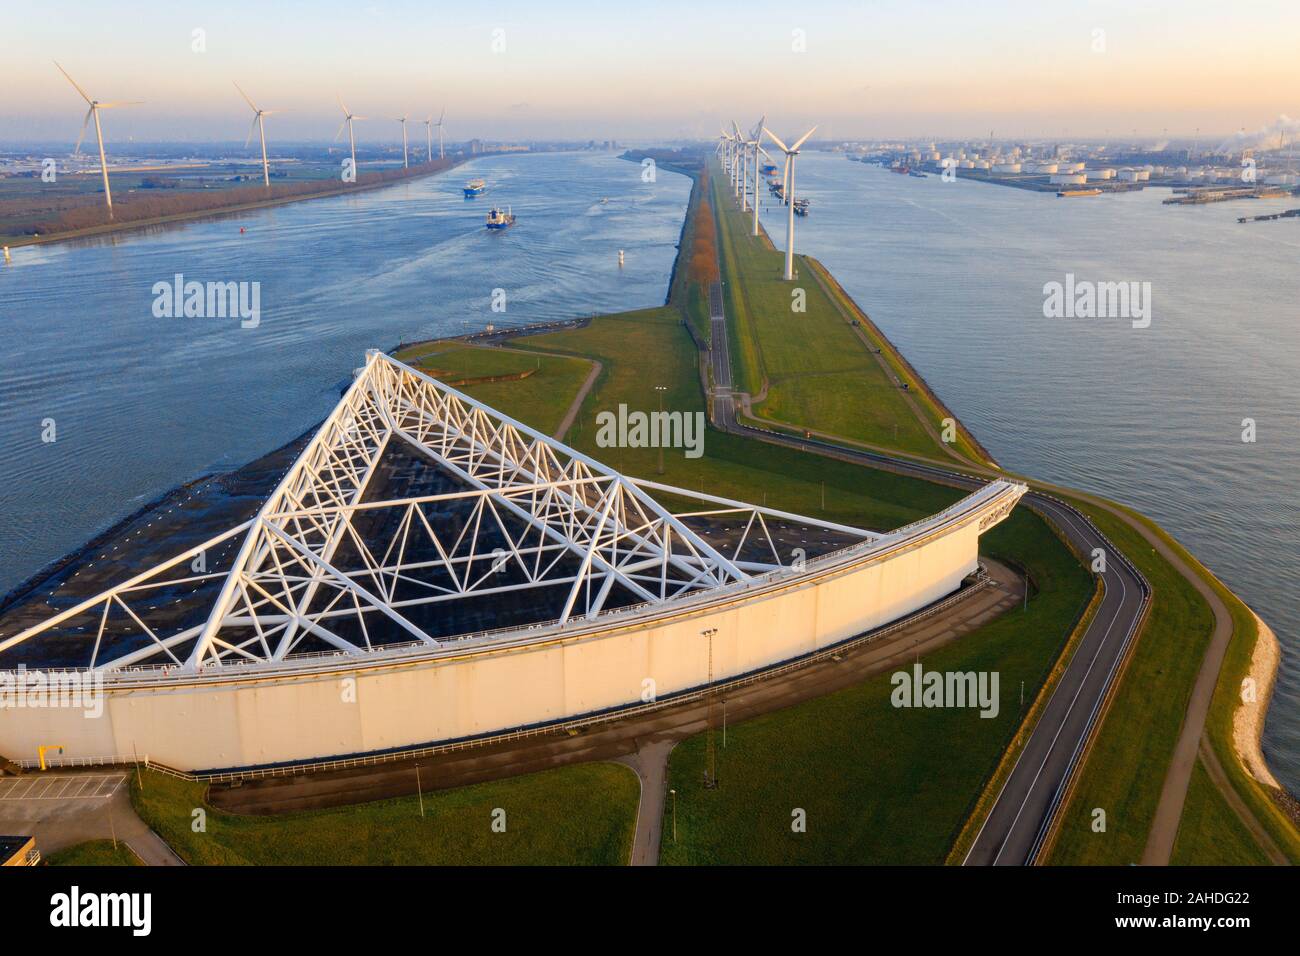 aerial view of Maeslandtkering -  Rotterdam Zuyid-holland is a impressive storm surge barrier. The Maeslantkering is a storm surge barrier on the imag Stock Photo